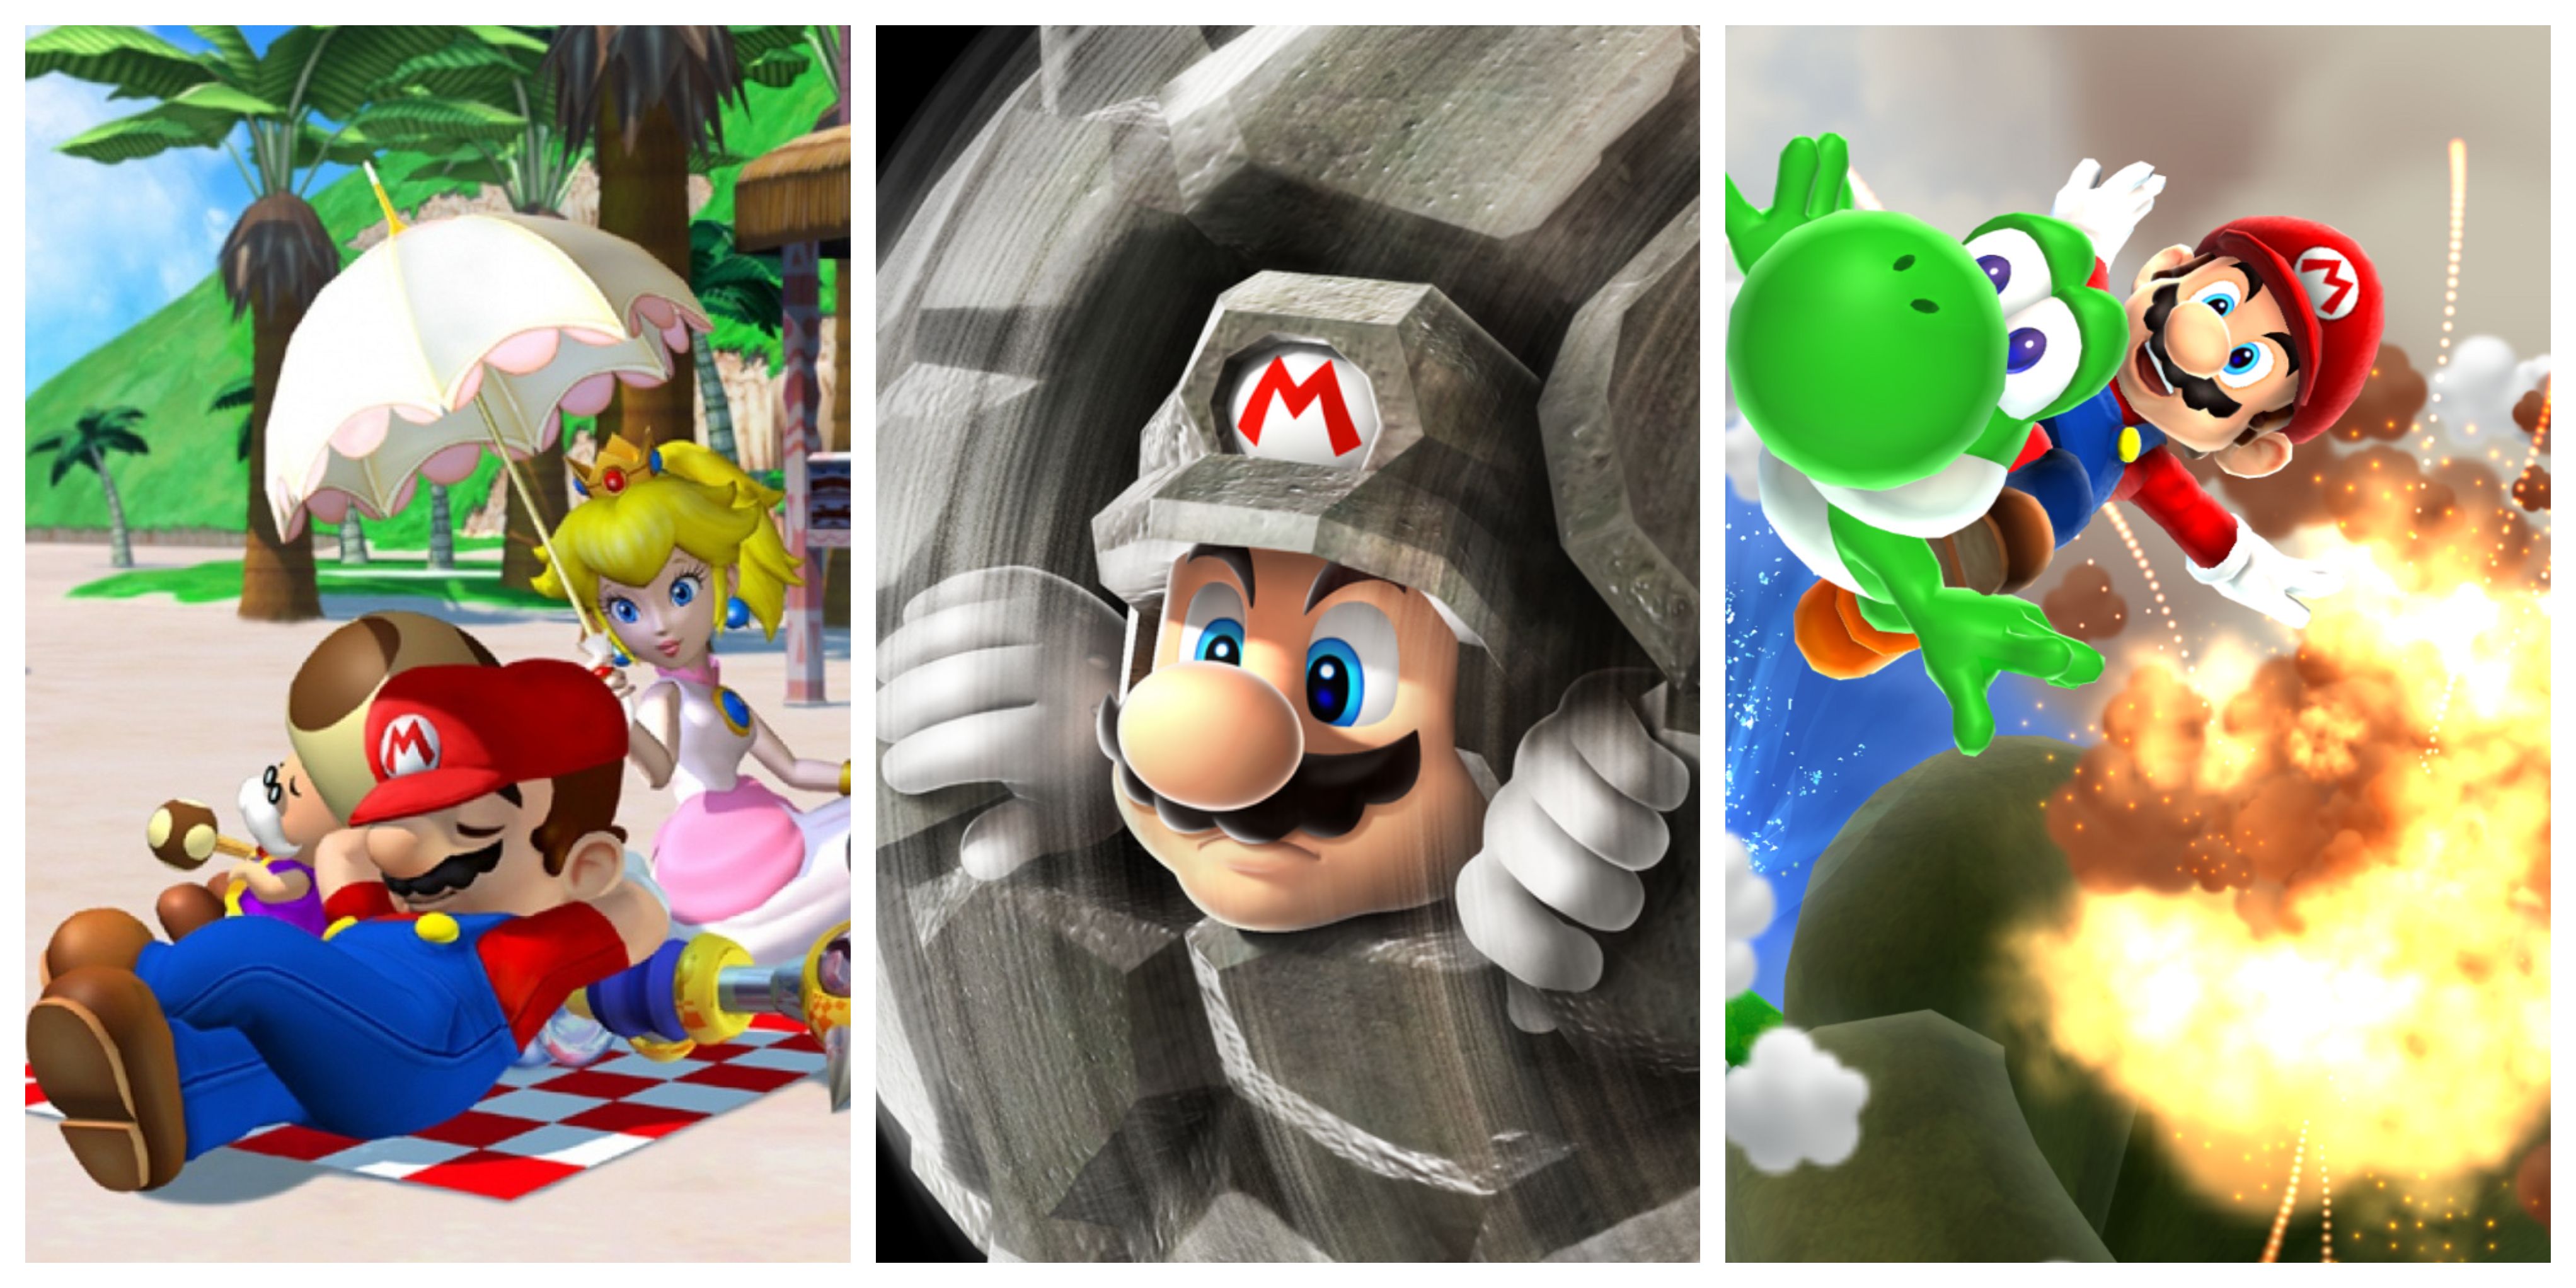 10 Best Mario Games on Nintendo Wii of All Time